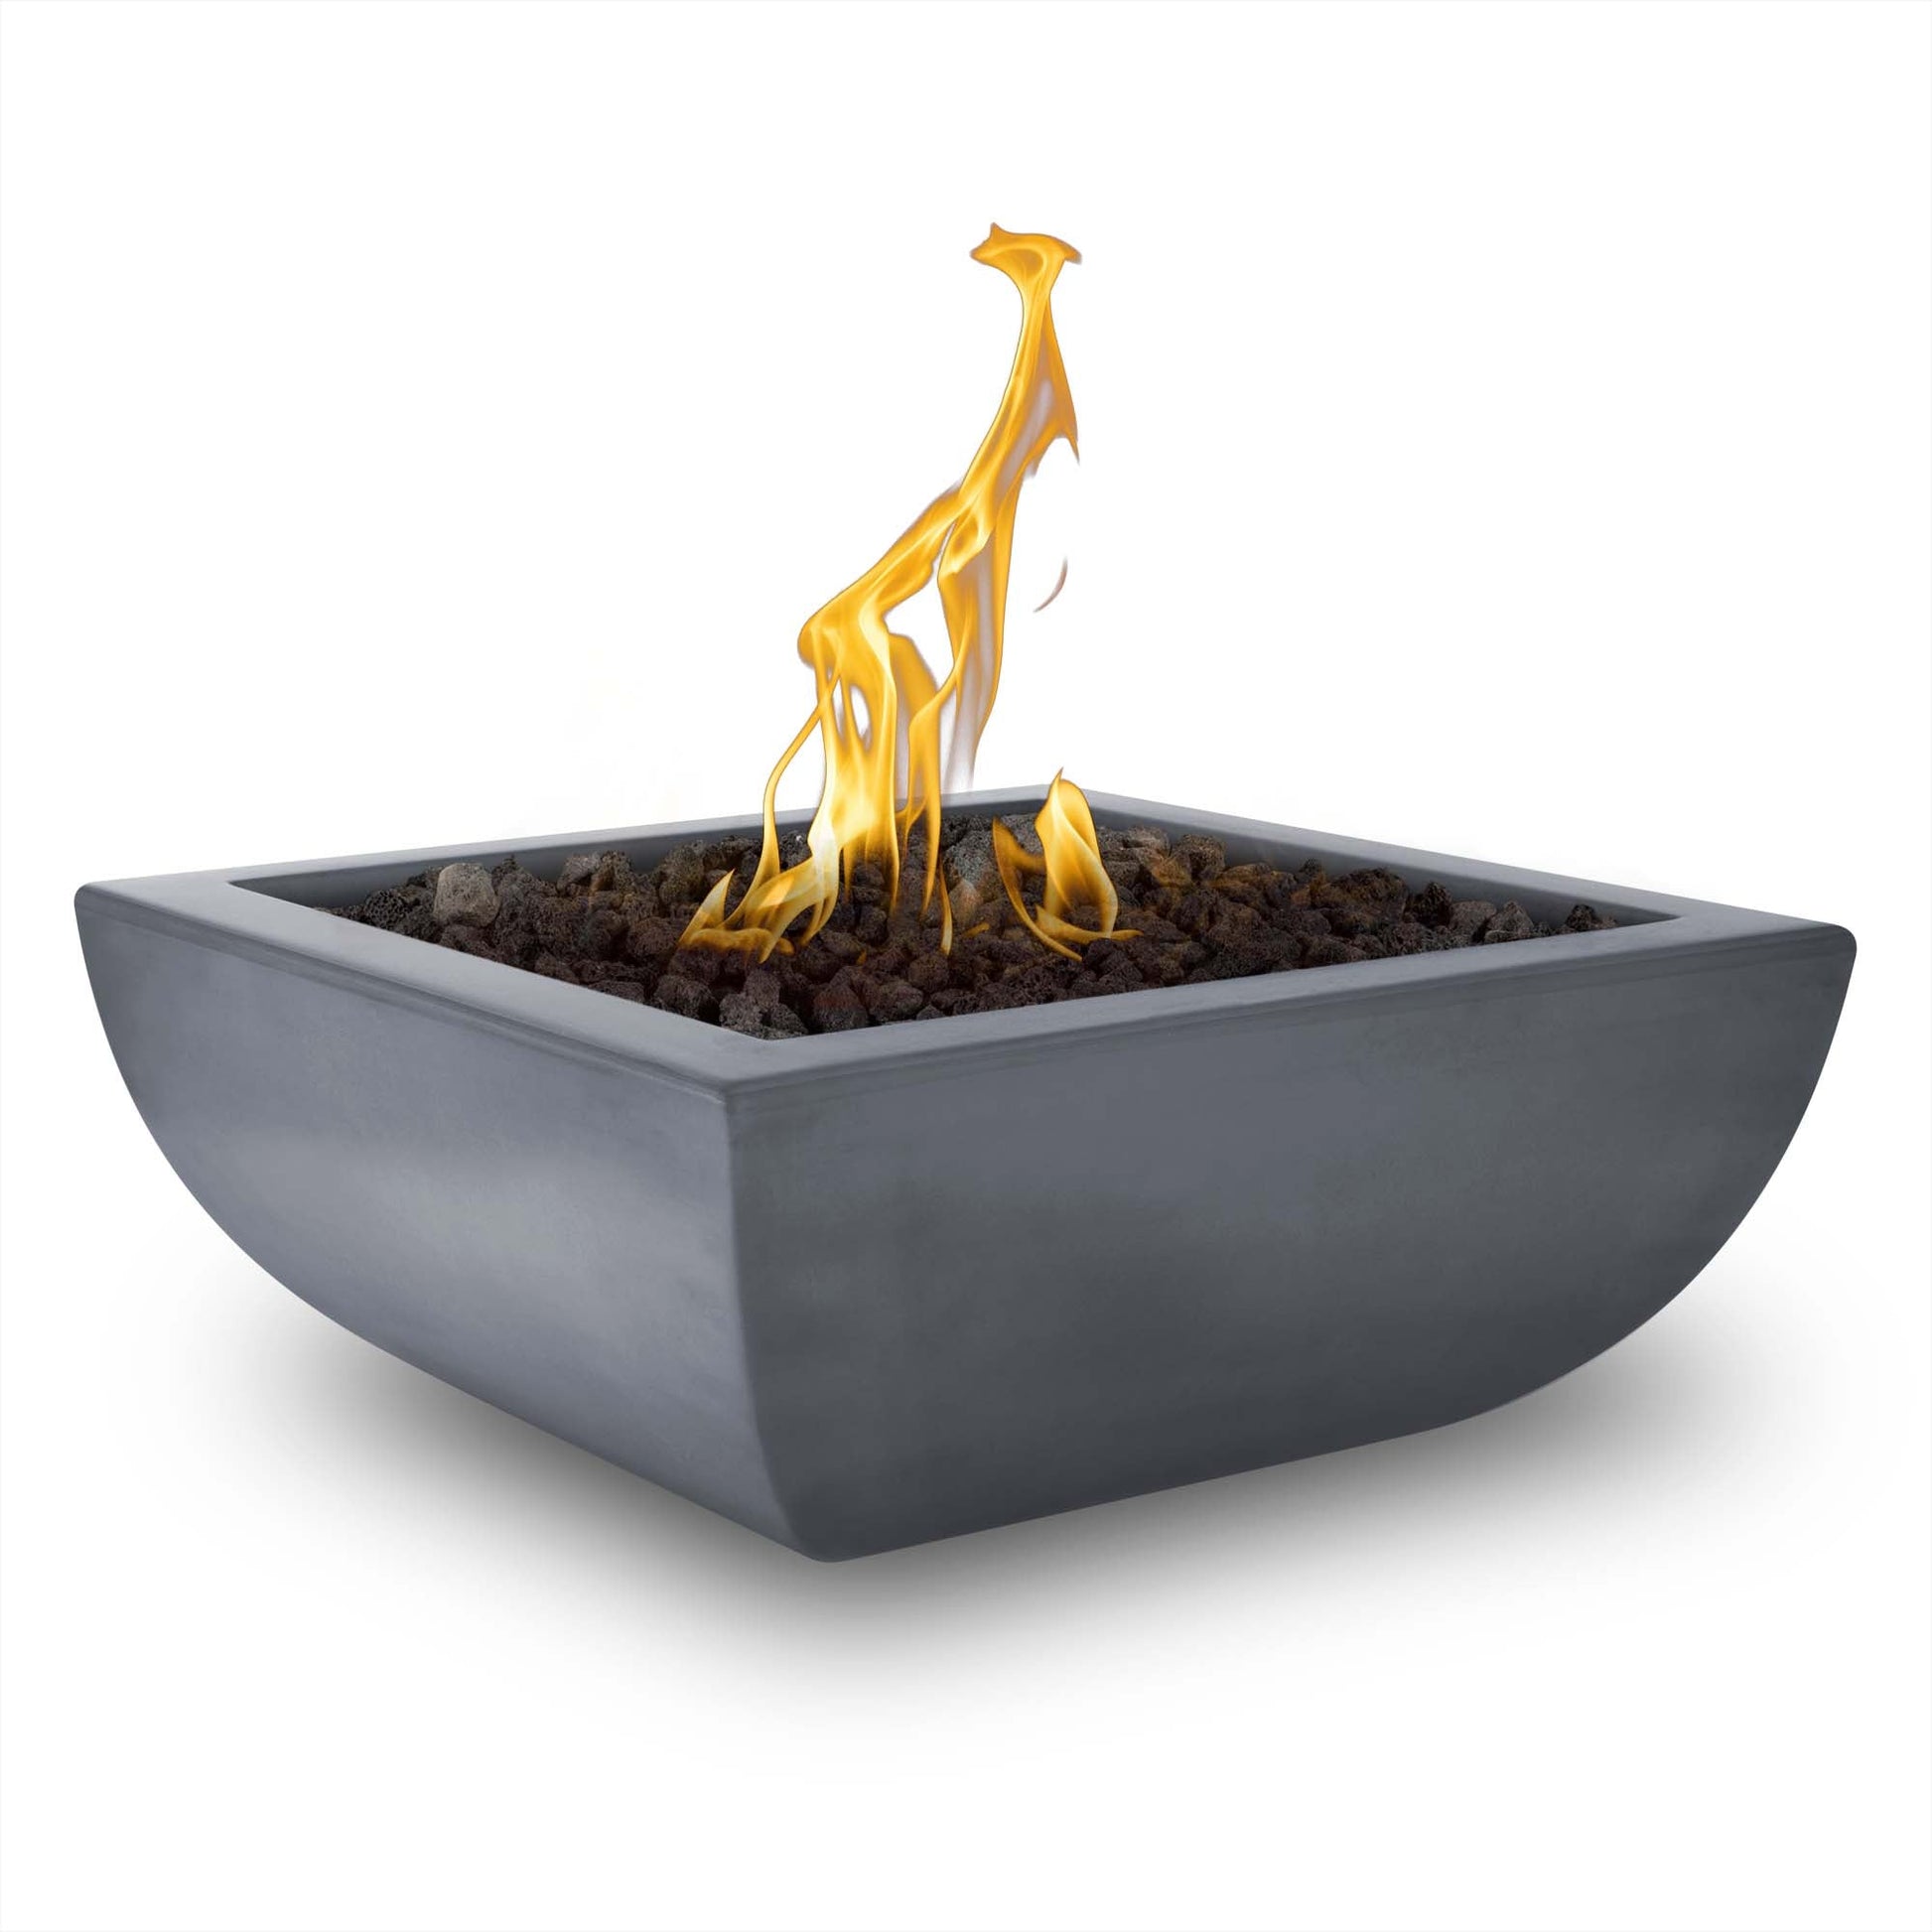 The Outdoor Plus Square Avalon 24" Natural Gray GFRC Concrete Liquid Propane Fire Bowl with Match Lit with Flame Sense Ignition